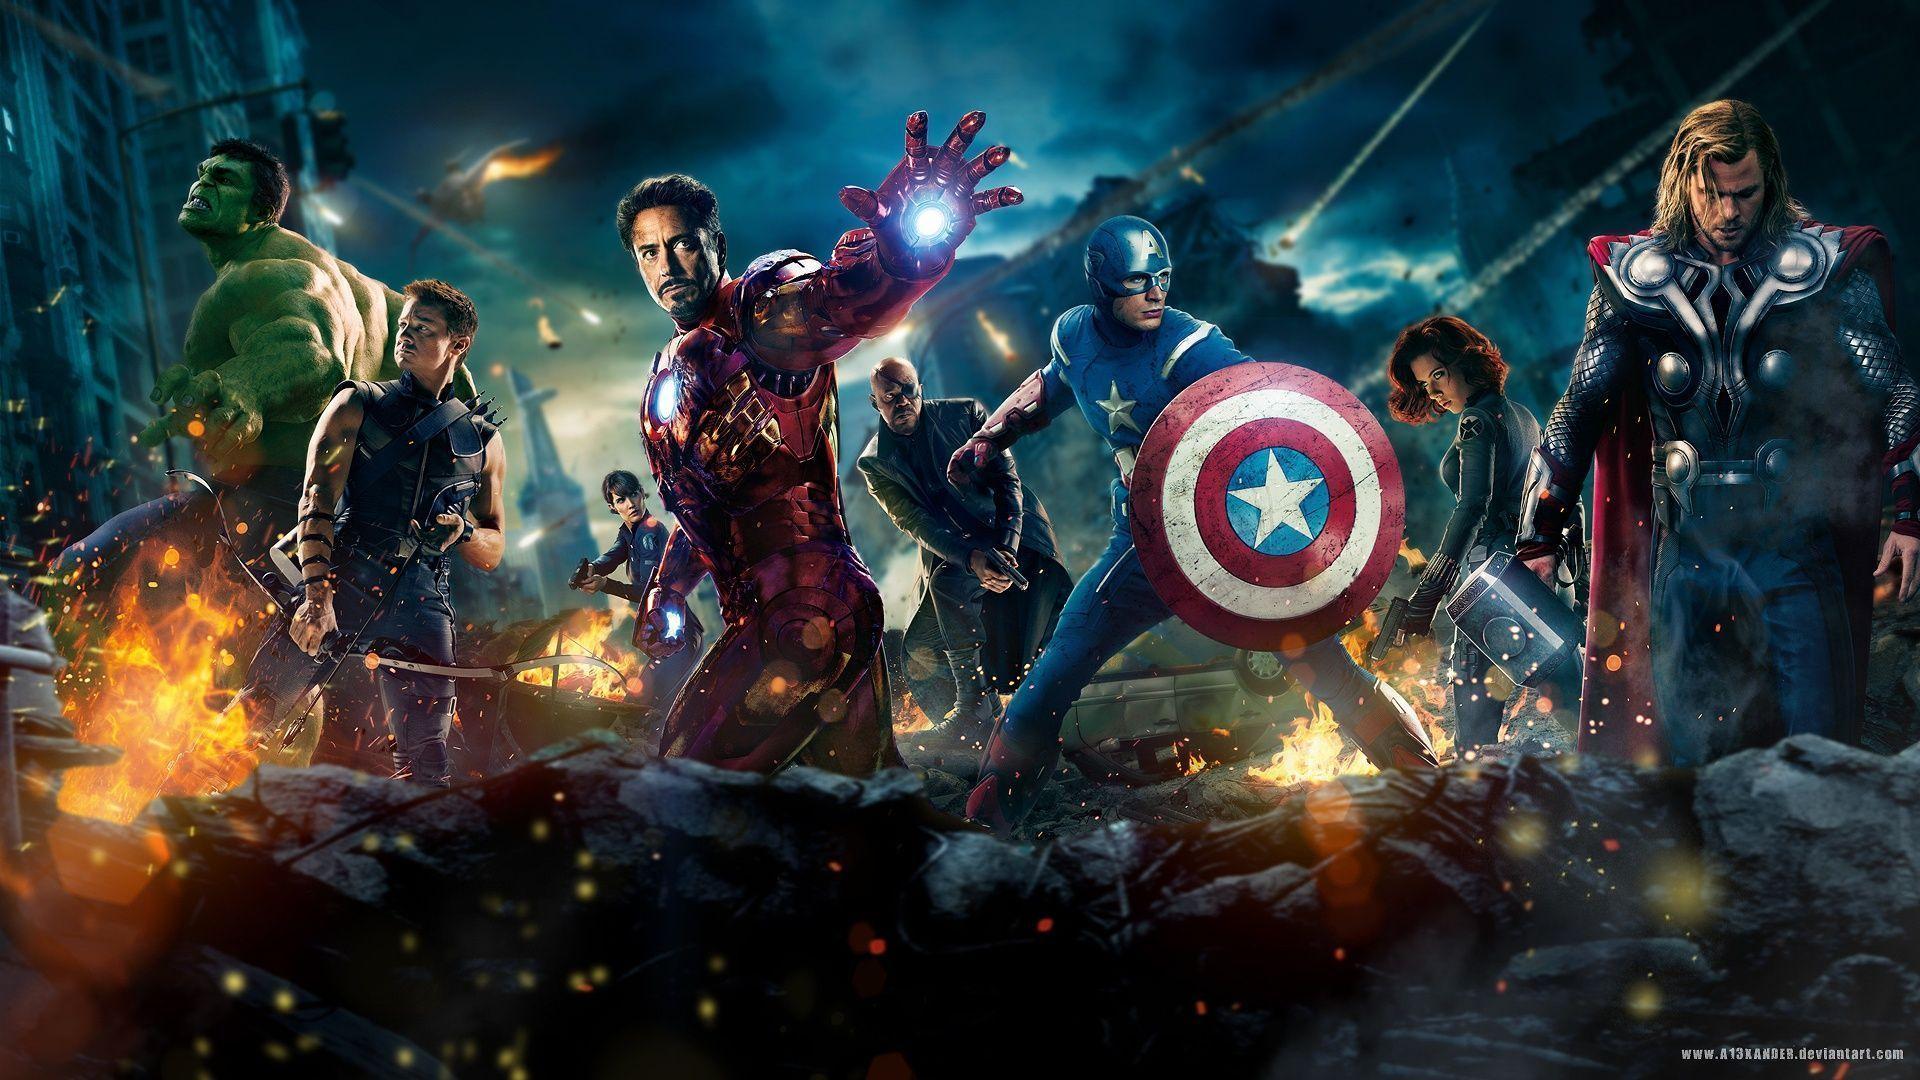 Wallpaper Tagged With AVENGERS. AVENGERS HD Wallpaper